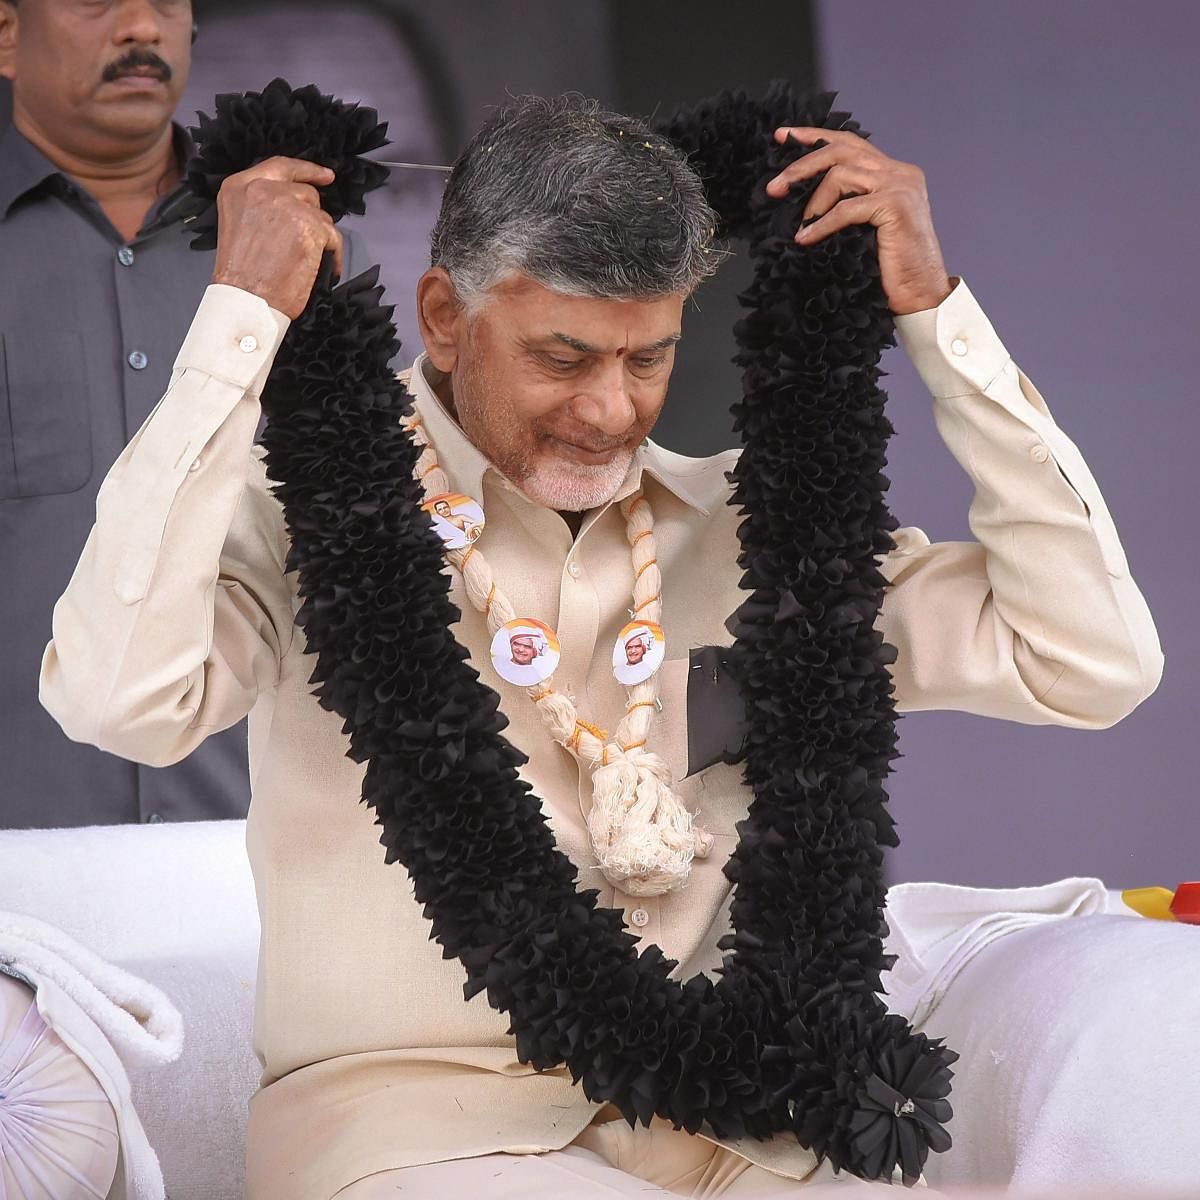 Vote-for-note scam comes to haunt Naidu